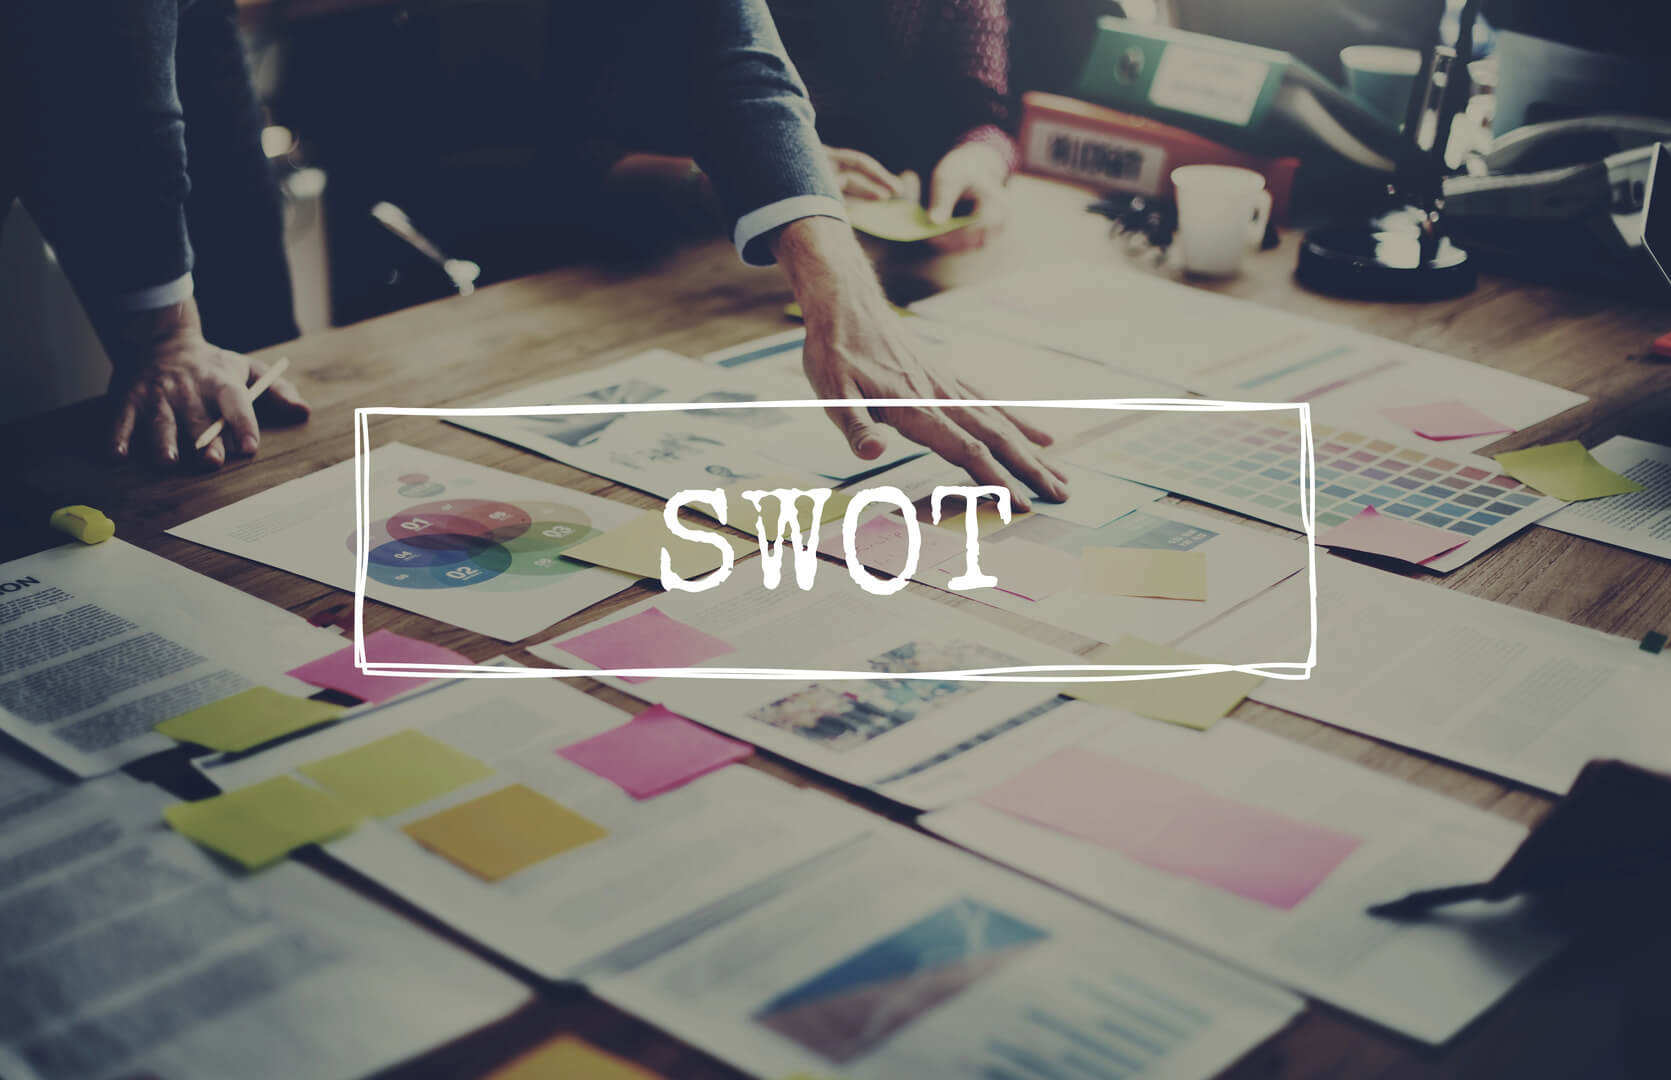 SWOT overlays a desk of papers and documents